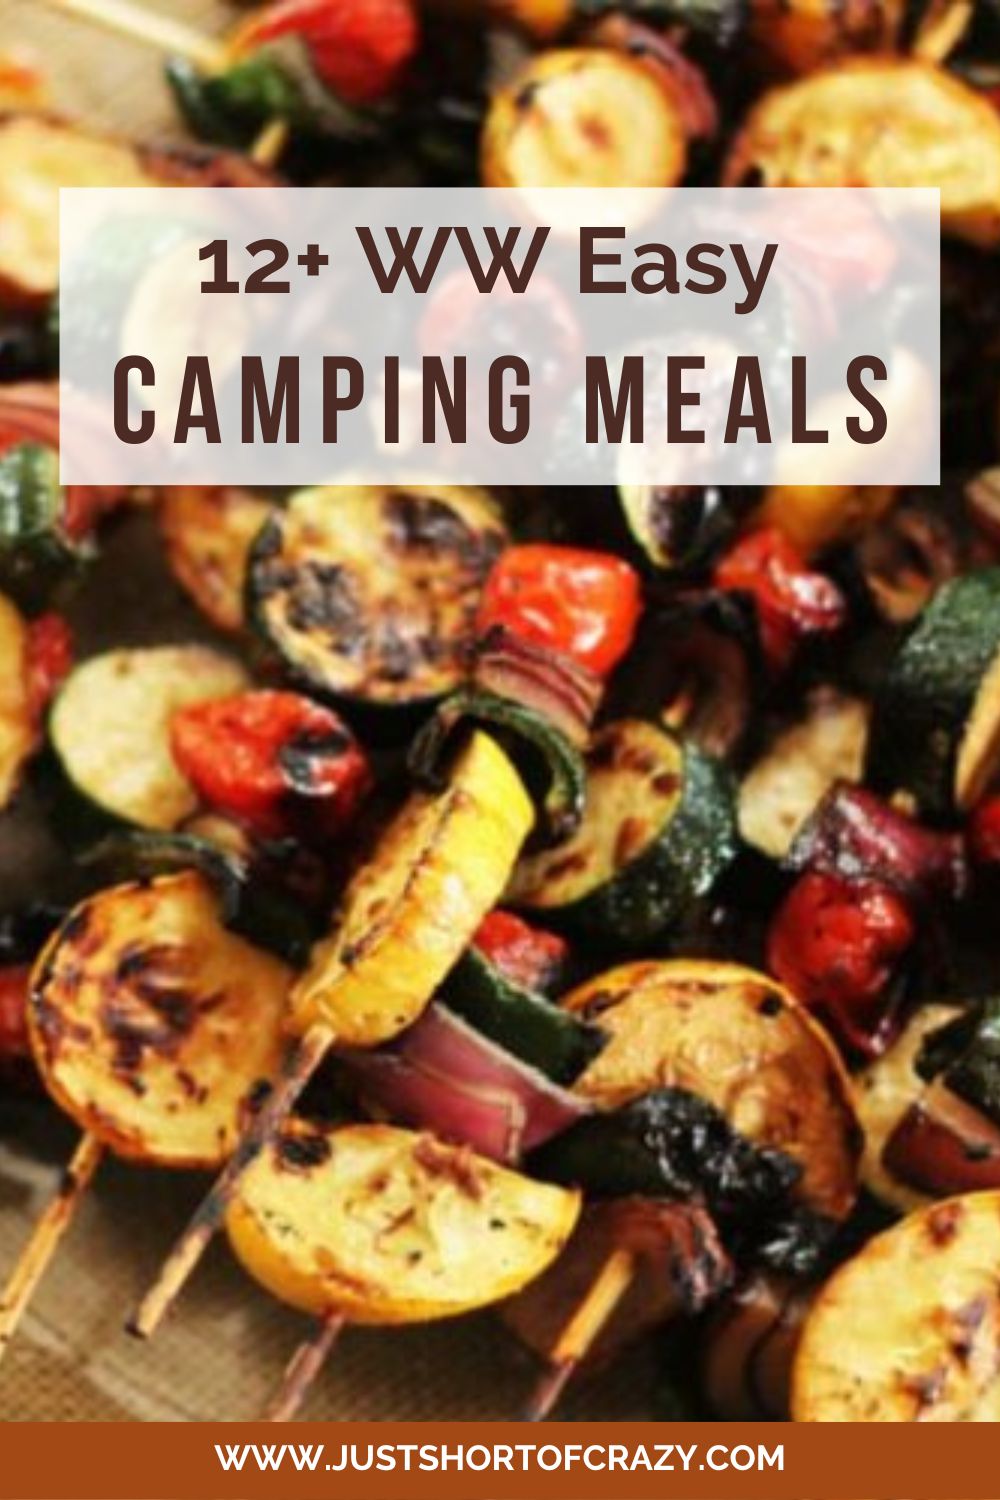 12+ WW Easy Camping Meals